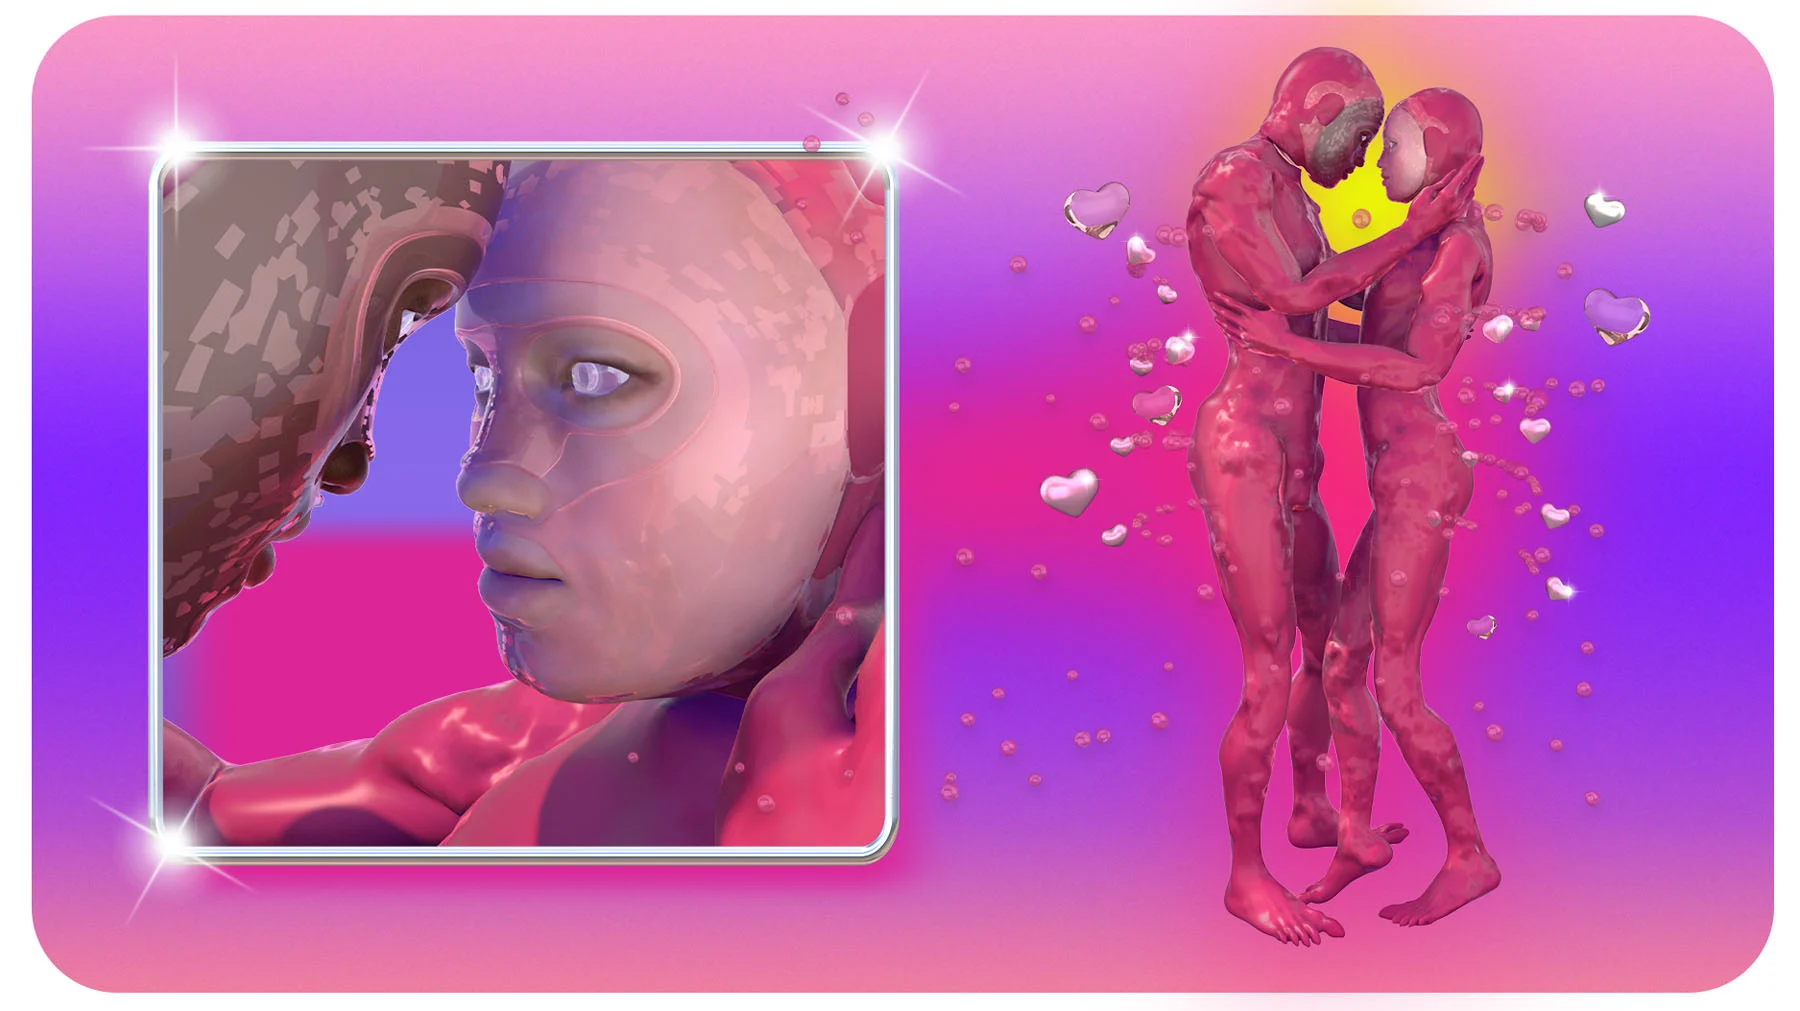 A CGI illustration showcases two perspectives of pink-colored, flesh-skinned figures wearing human masks. The couple intimately holds each other, exchanging affectionate glances as hearts and sparkles circulate around them.